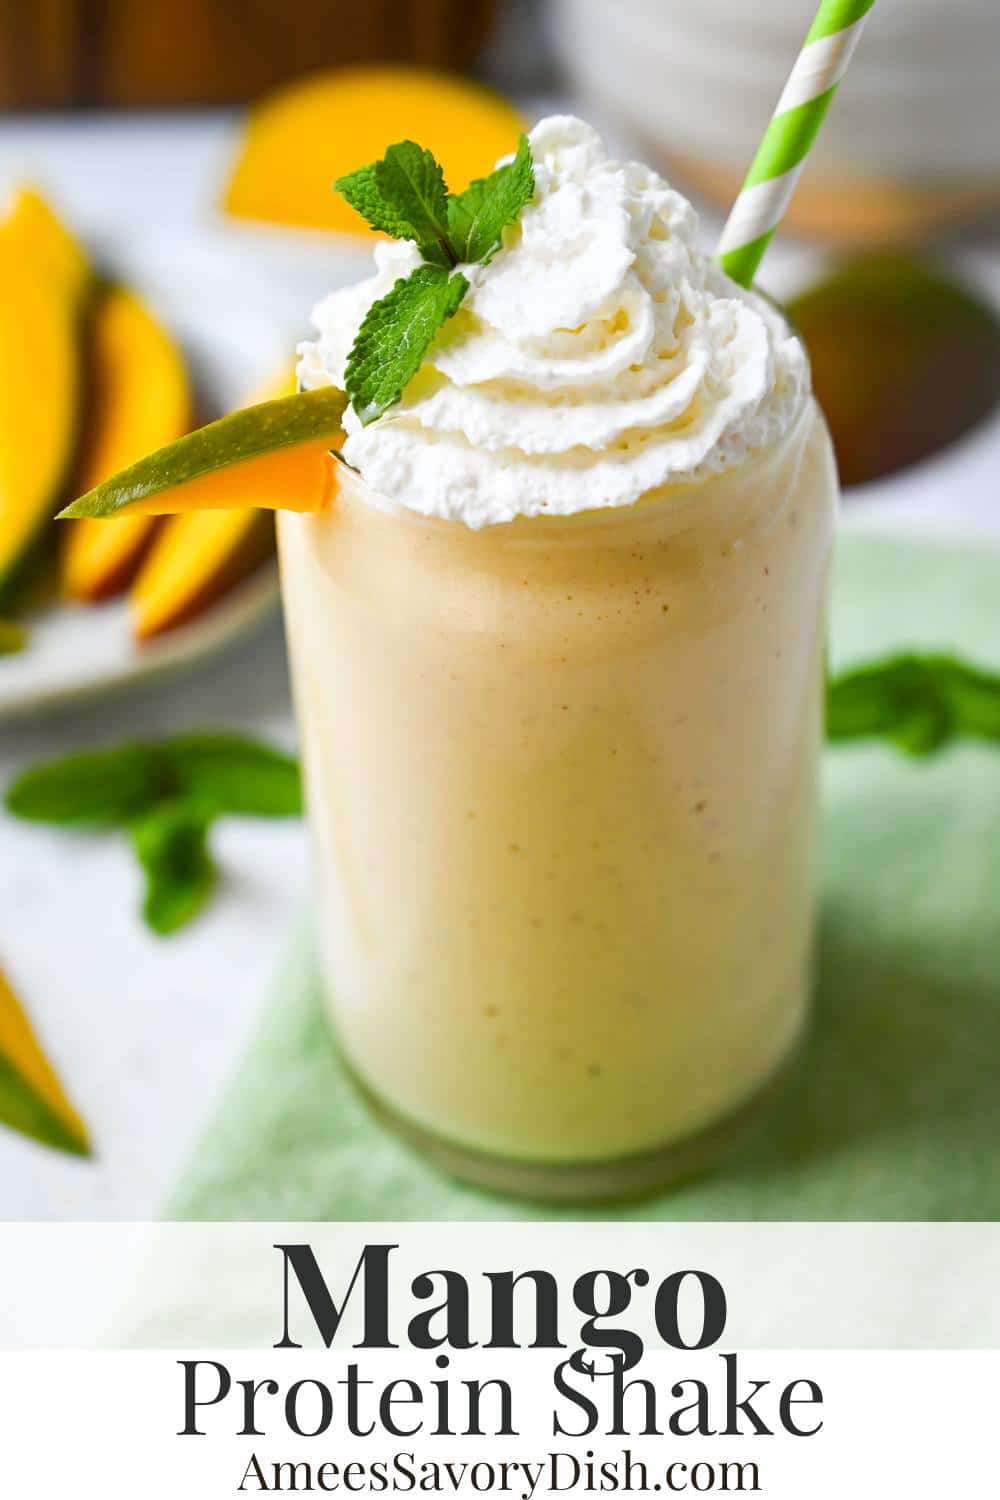 This delicious mango protein shake is perfect for a quick protein-packed breakfast or a post-workout tropical treat!   via @Ameessavorydish